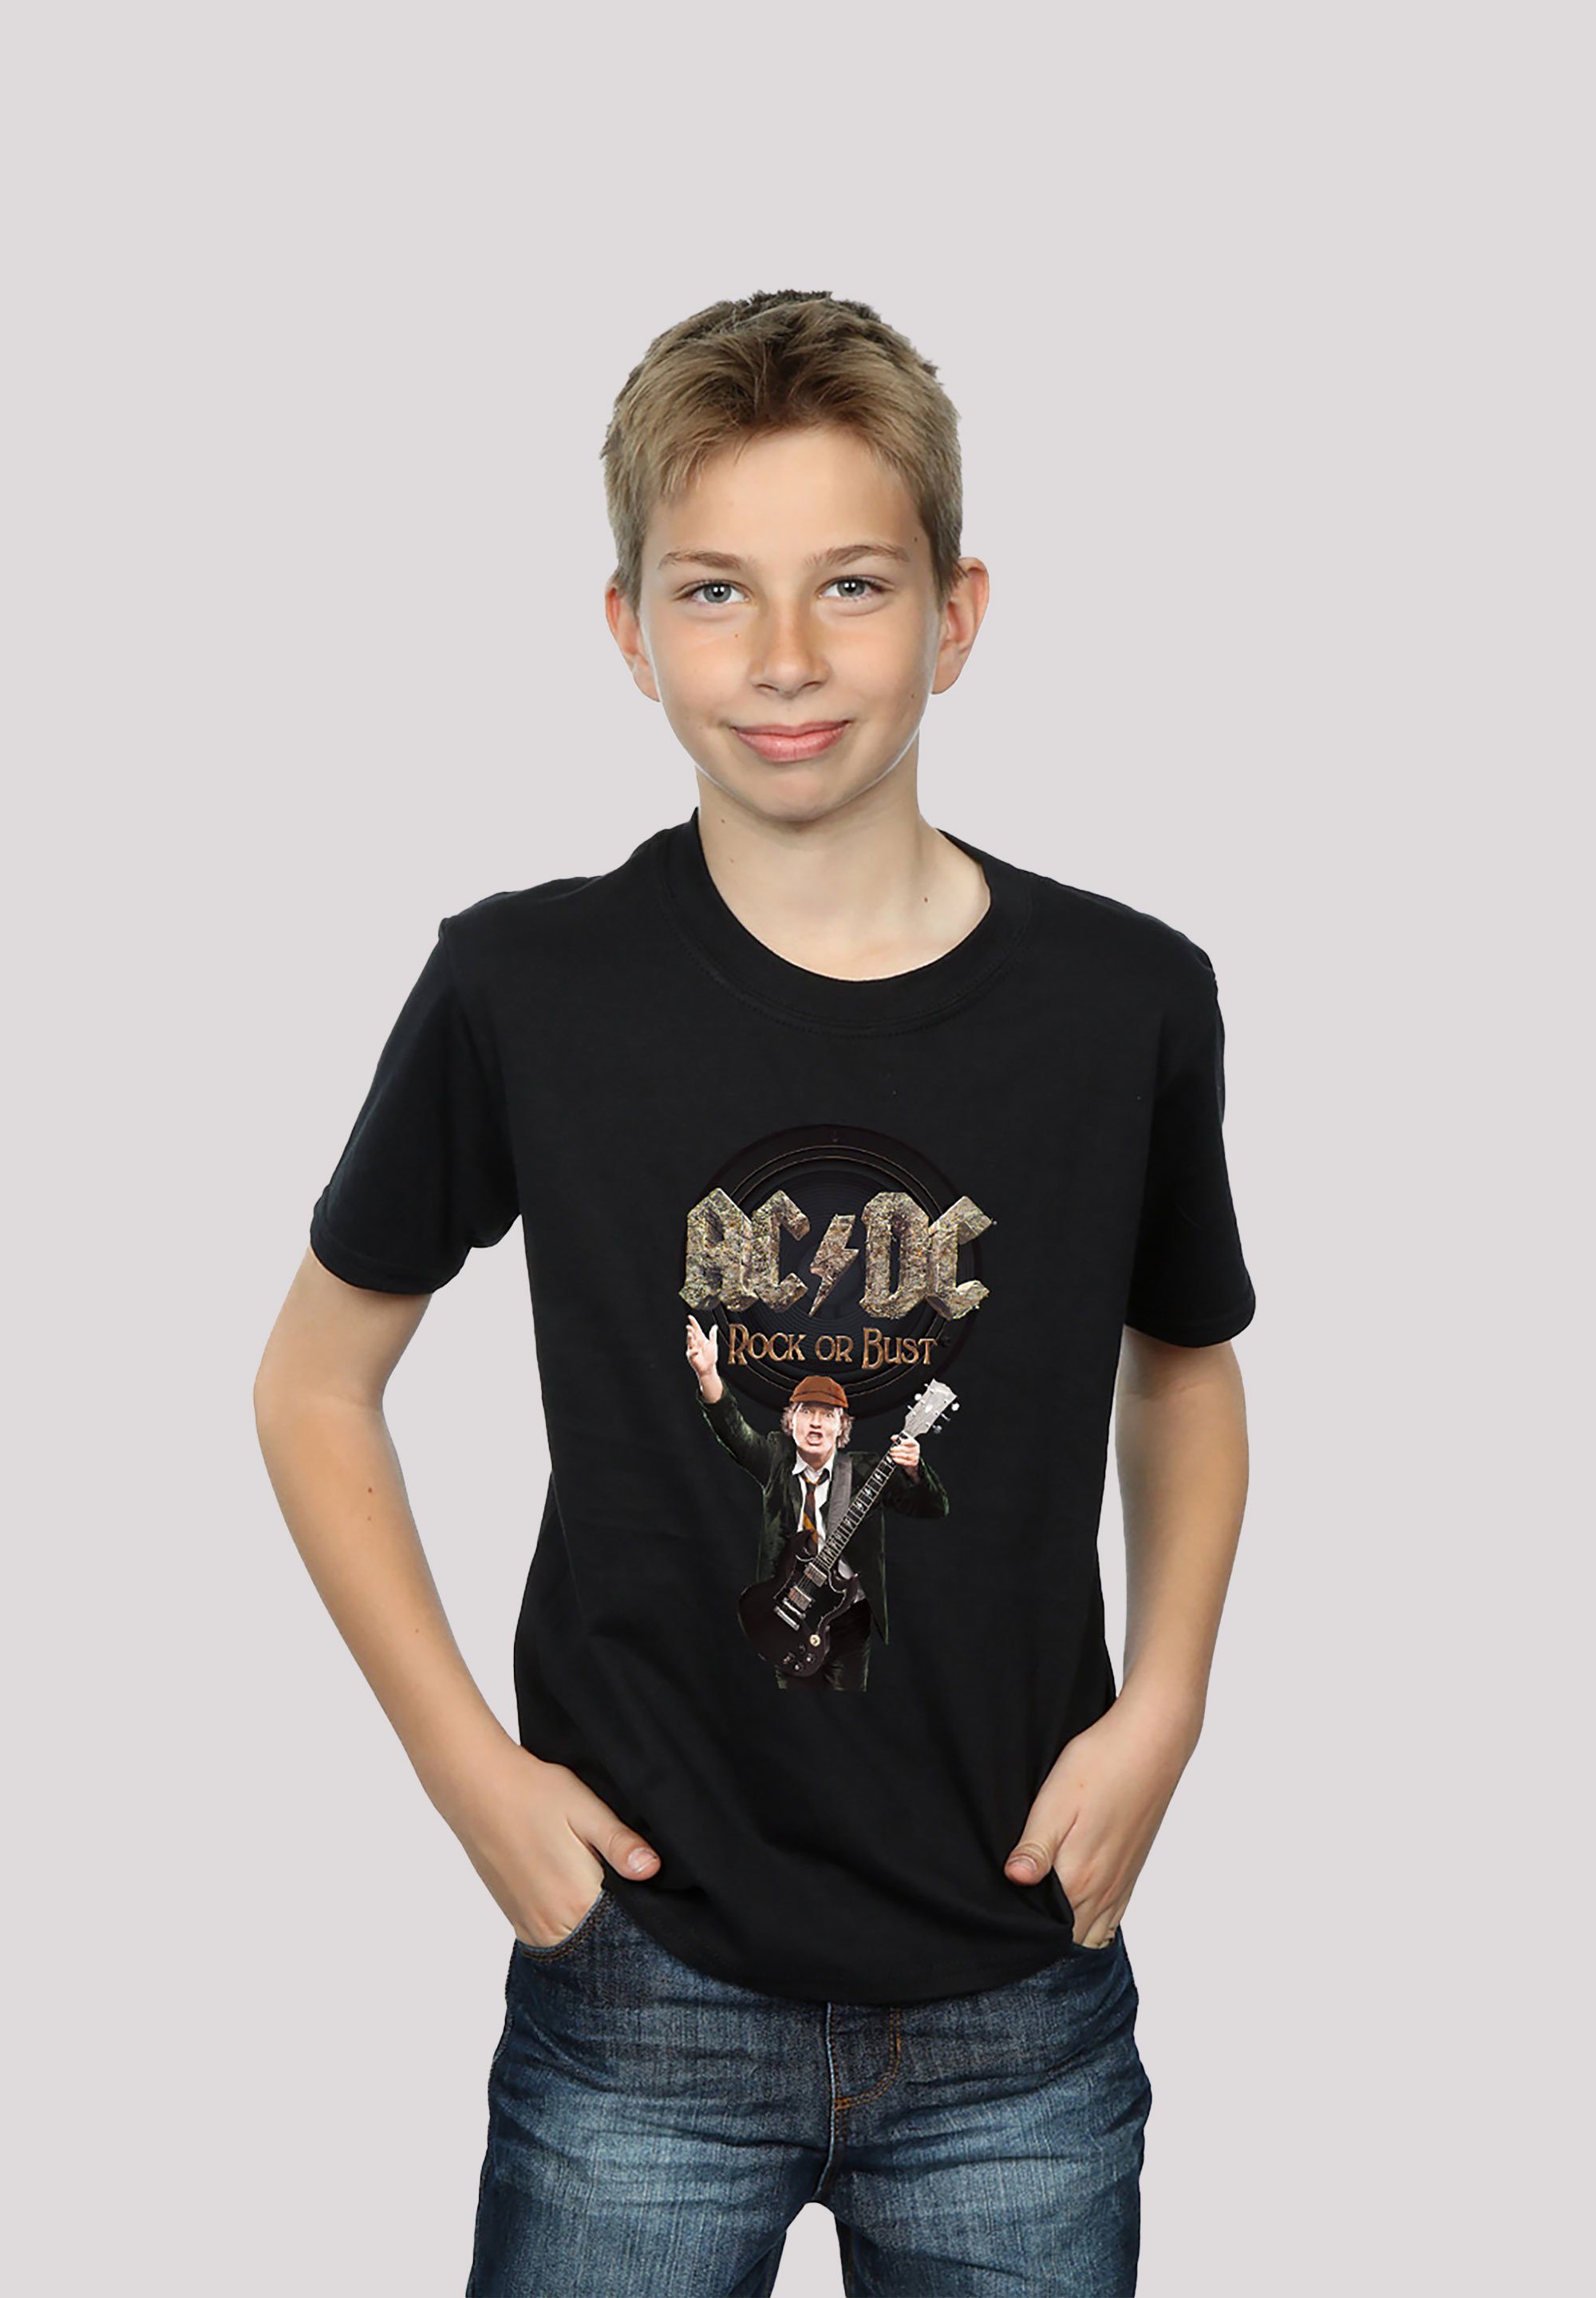 Bust Angus für F4NT4STIC Print Rock ACDC Or & Kinder Young Herren T-Shirt